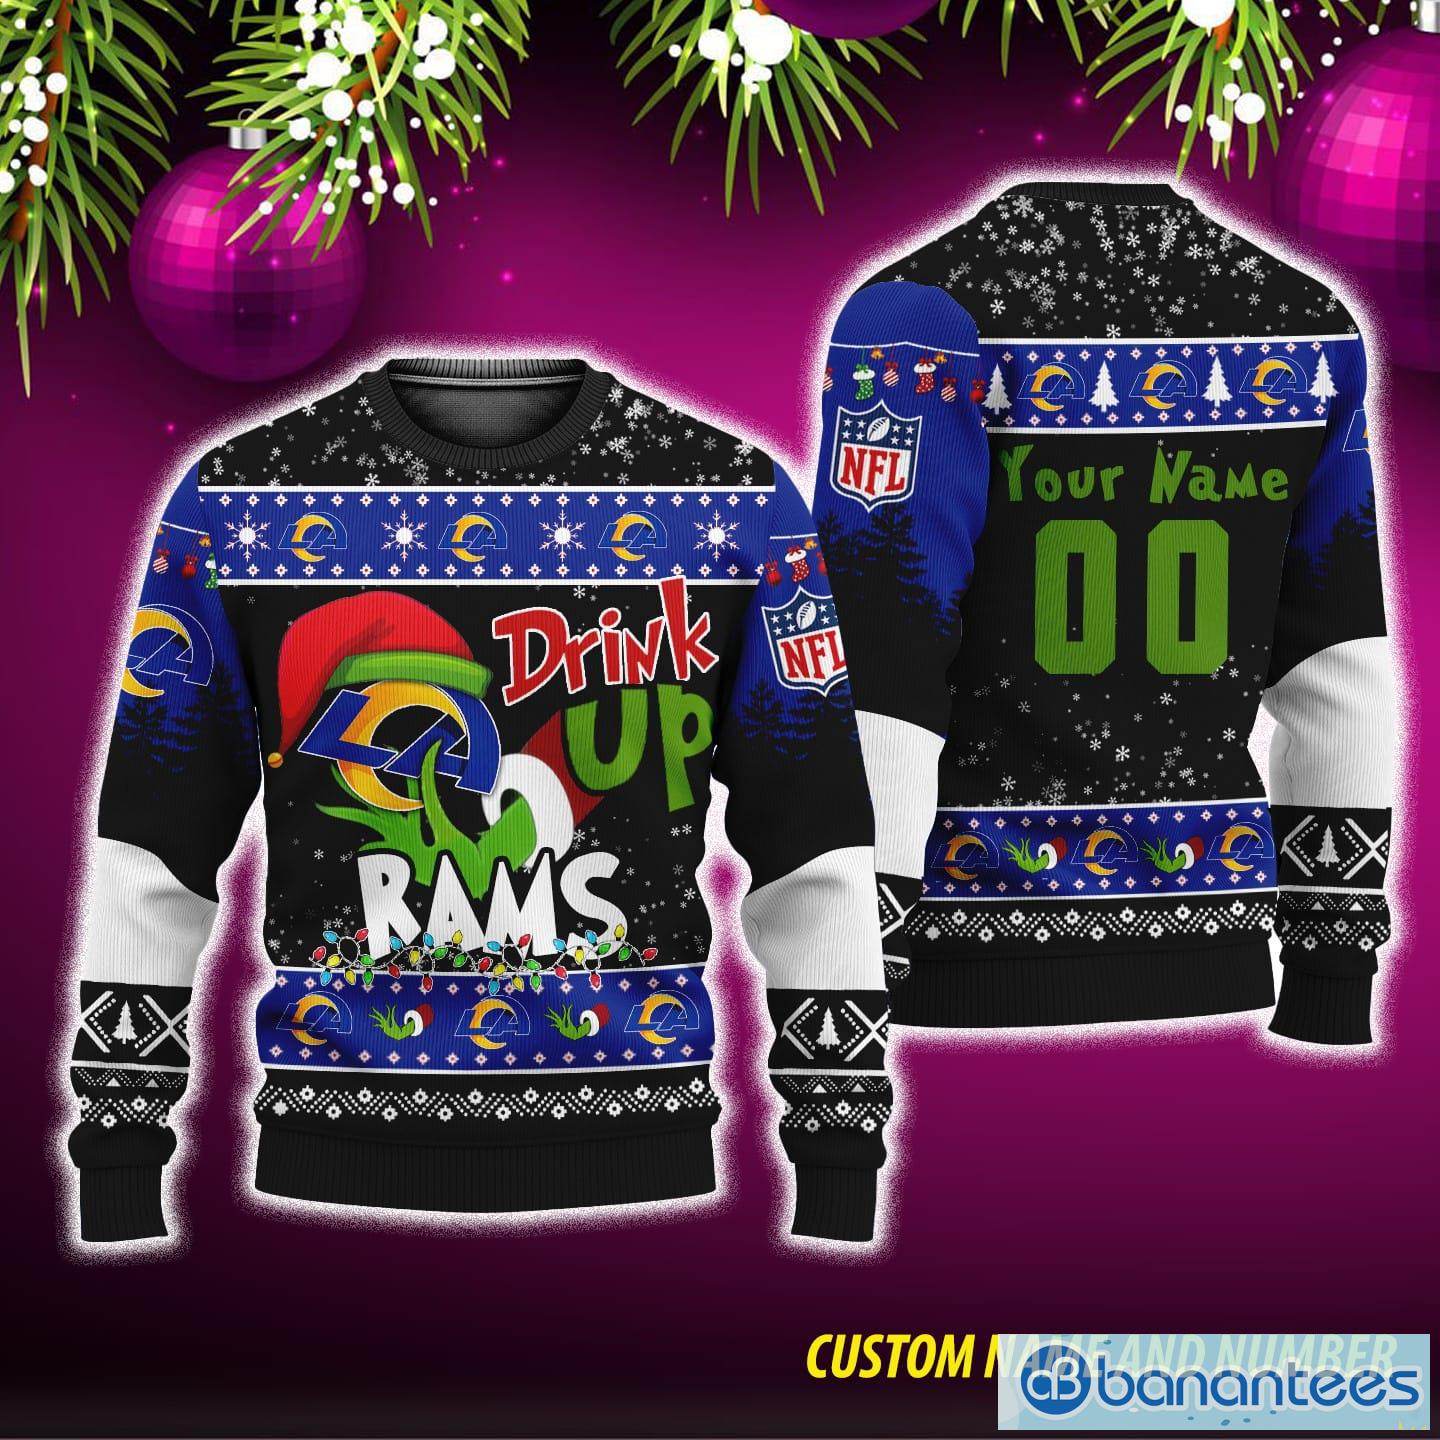 NFL Grinch Drink Up Los Angeles Rams Ugly Christmas Sweater Custom Number And Name - NFL Grinch Drink Up Los Angeles Rams Ugly Christmas Sweater Custom Number And Name